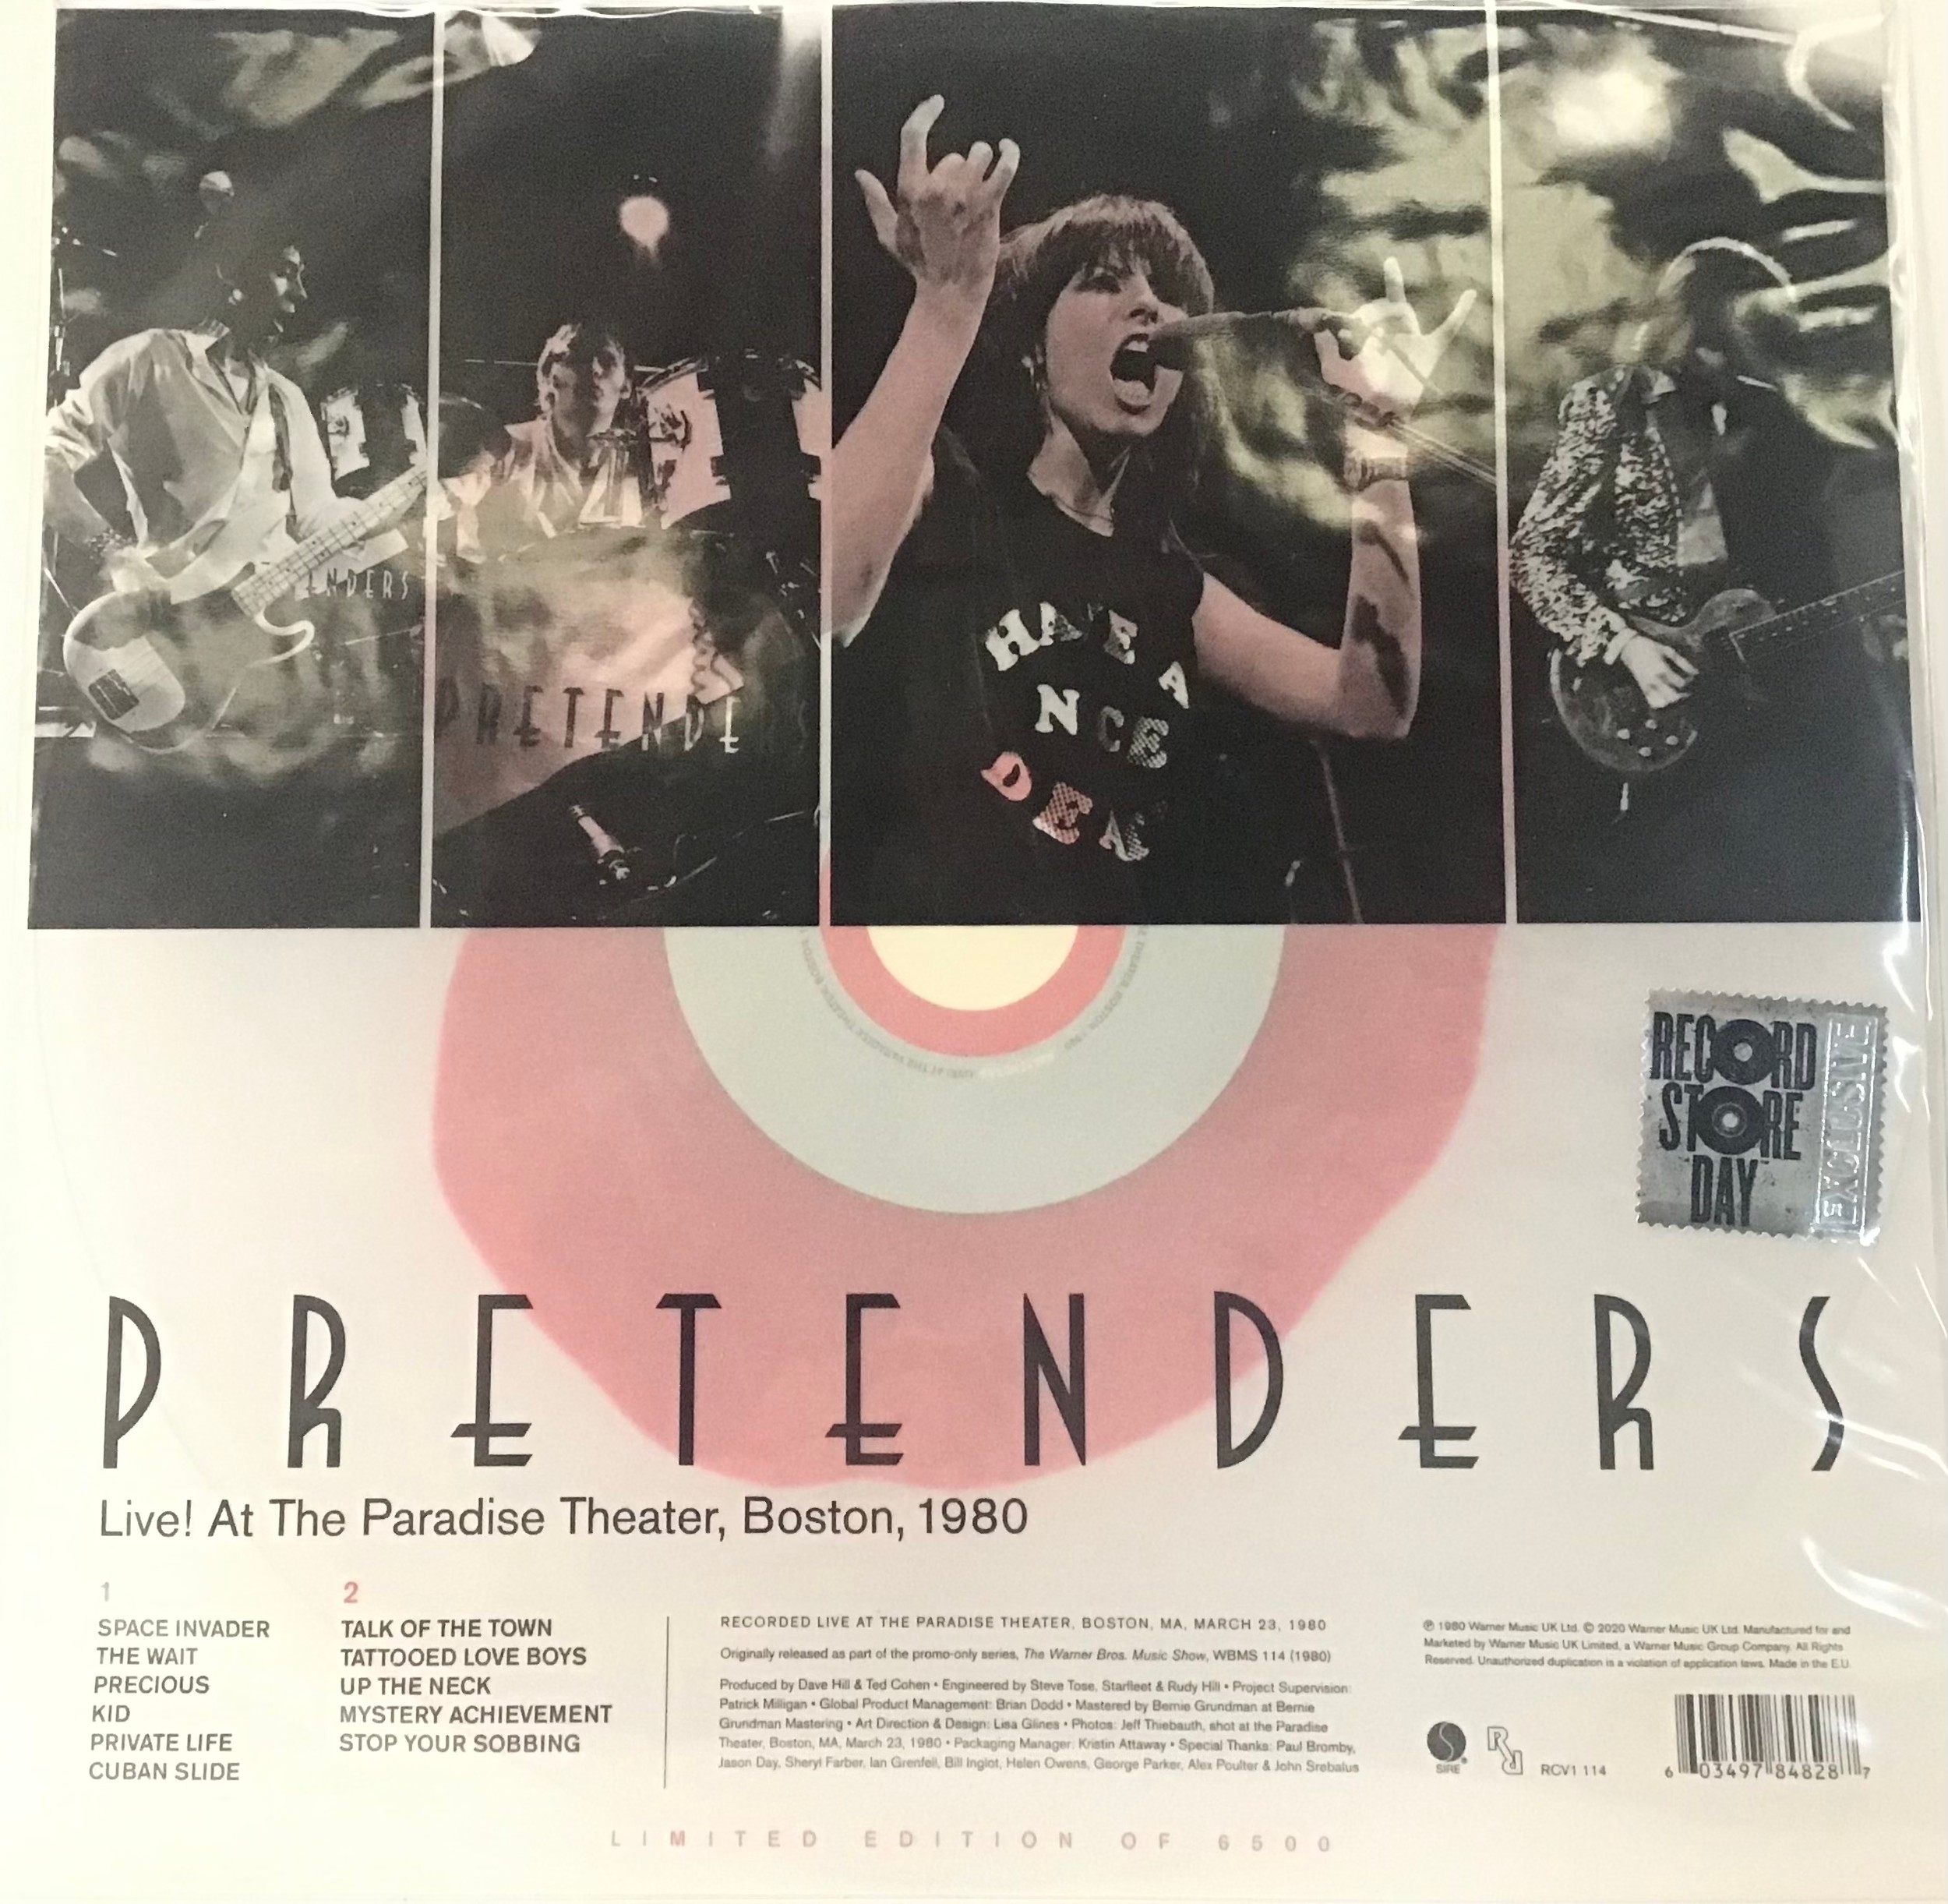 THE PRETENDERS - LIVE AT PARADISE THEATRE SEALED VINYL ALBUM. This was released for a Record Store